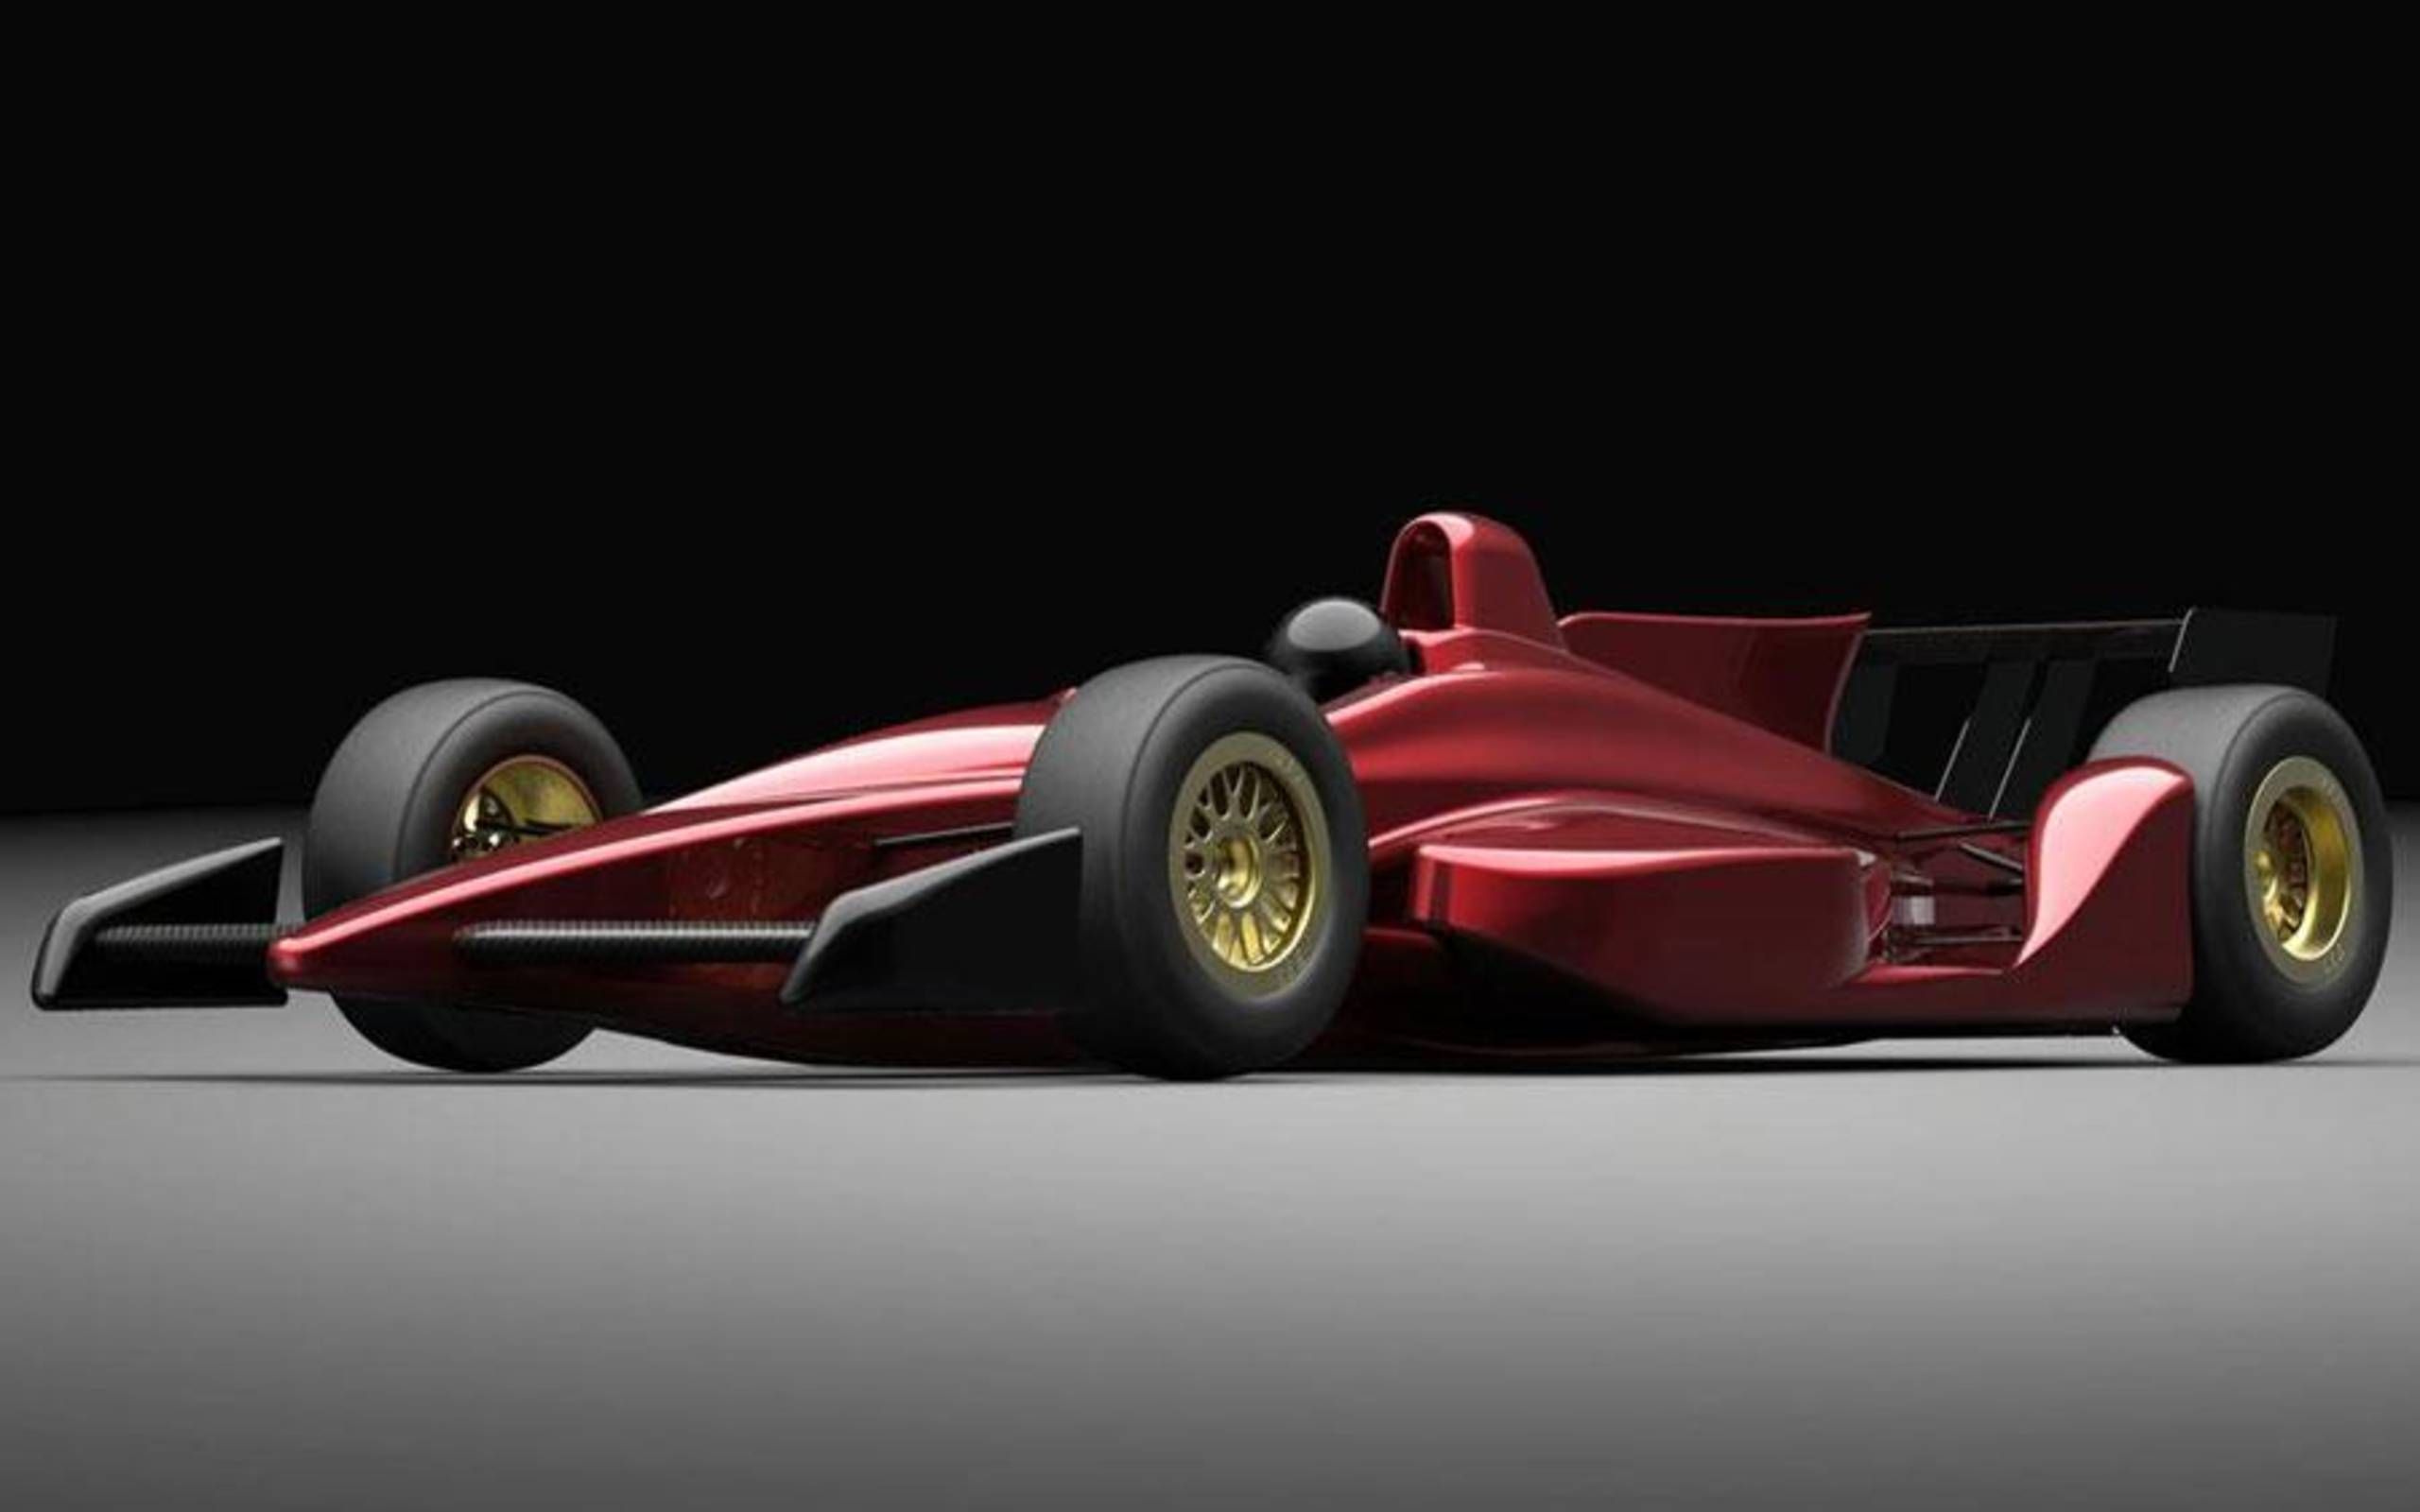 New Indy Lights Dallara Chassis RevealedPerformance Racing Industry